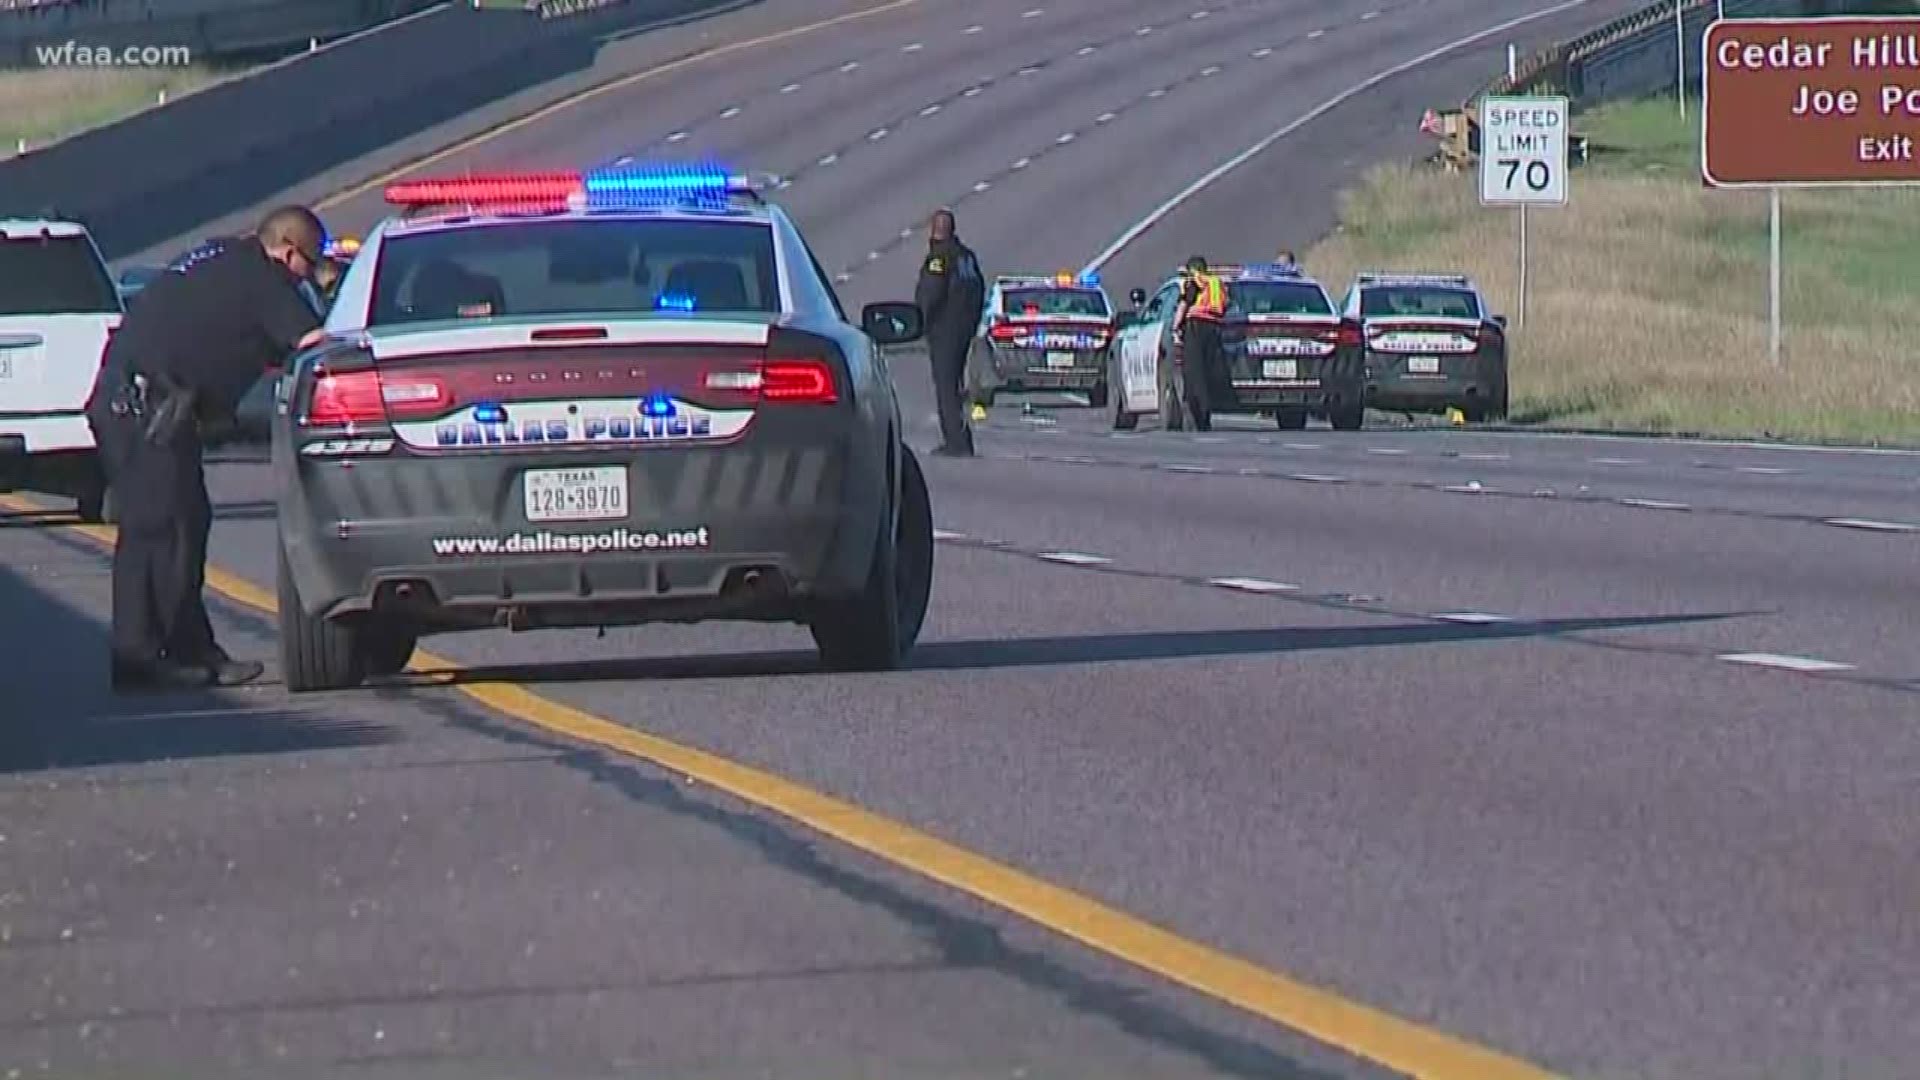 Dallas officer still critical but improved after hit by vehicle on I-20, police say